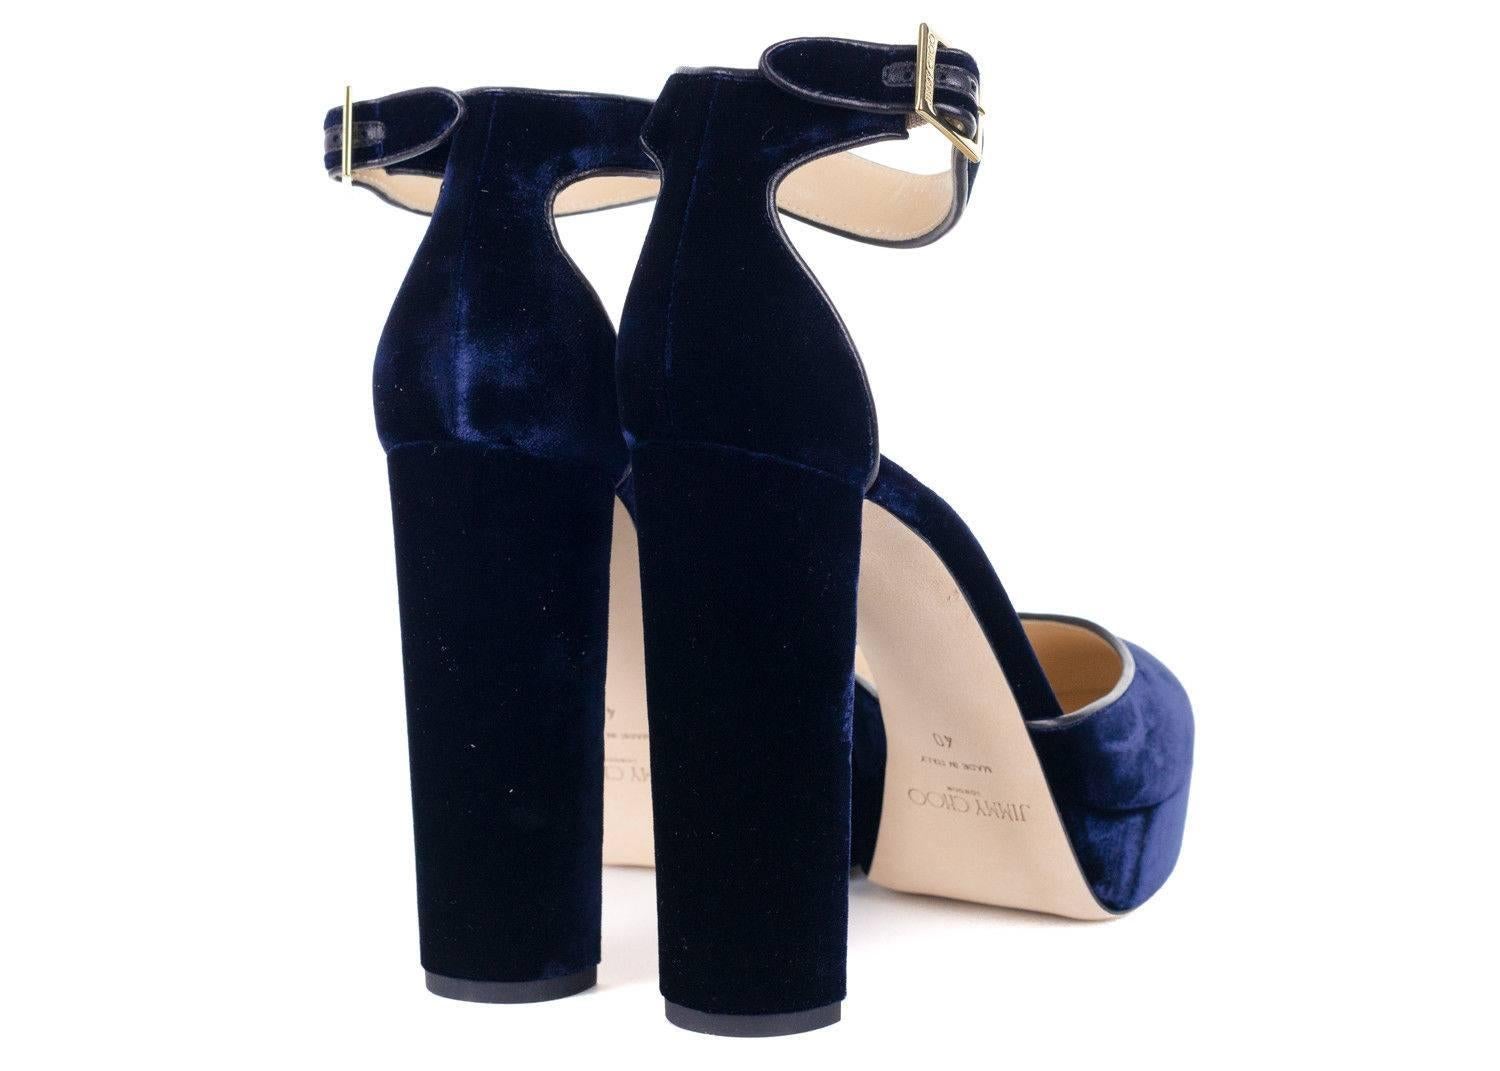 Jimmy Choo navy velvet Daphne platform pumps. A raised platform adds some seventies inspiration as well as serious height. The classic silohuette is timeless and will slot effortlessly into your current edit.

Composition Velvet
Platform 1 inch Heel